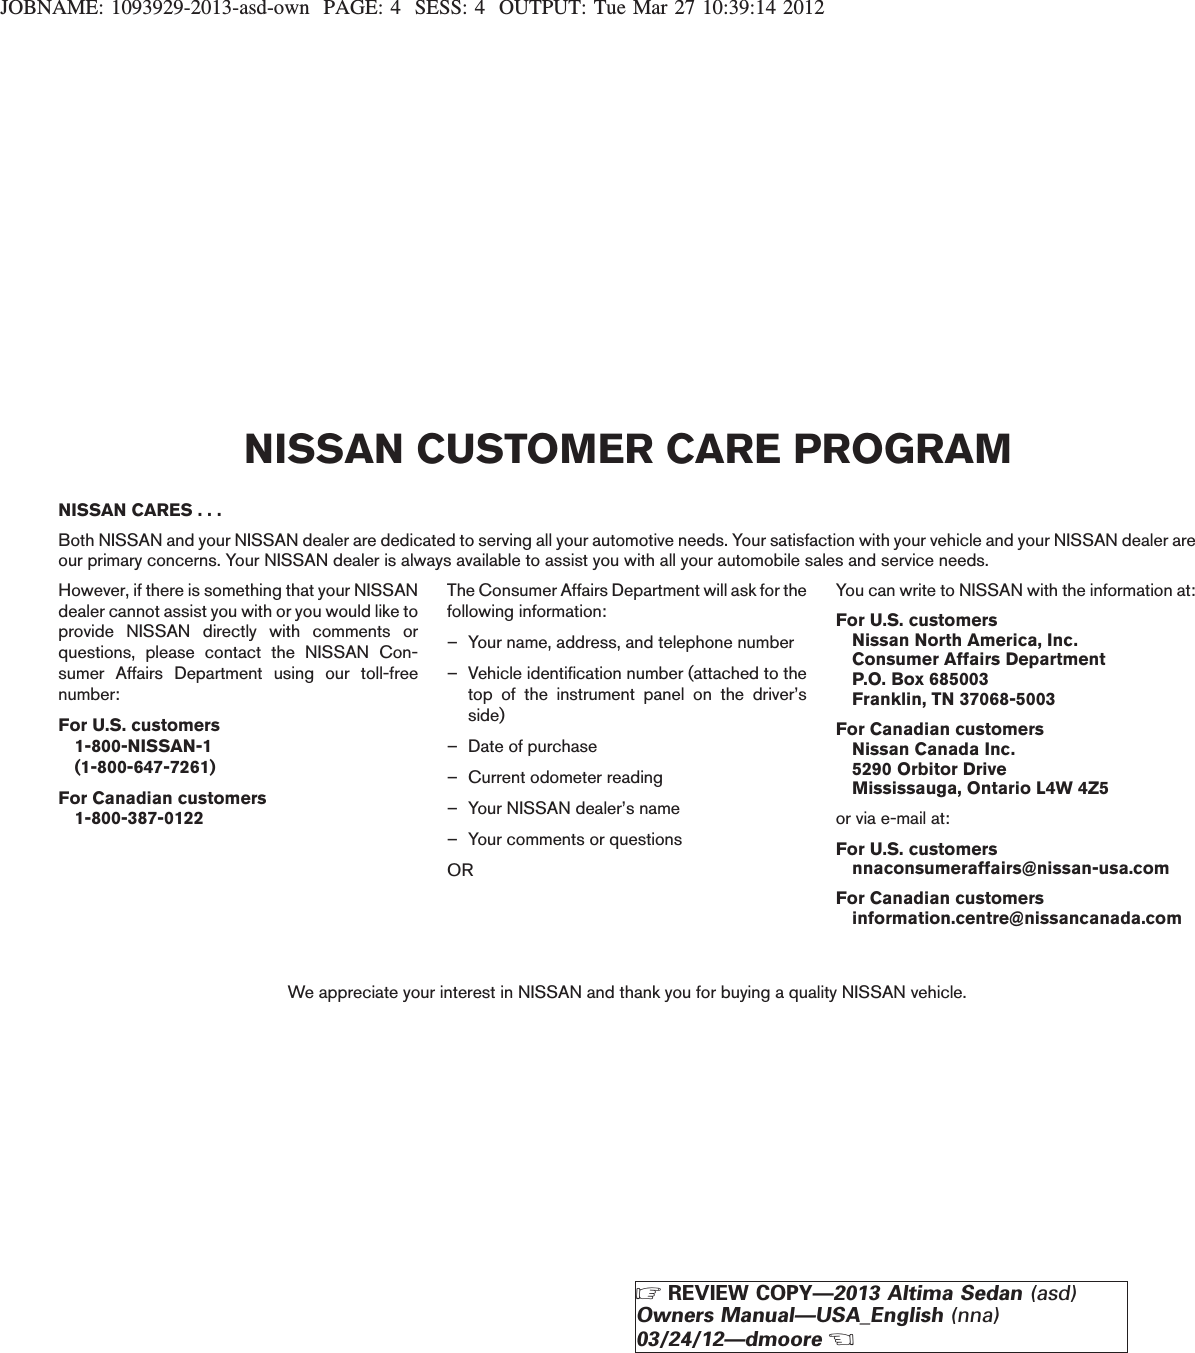 JOBNAME: 1093929-2013-asd-own PAGE: 4 SESS: 4 OUTPUT: Tue Mar 27 10:39:14 2012NISSAN CARES . . .Both NISSAN and your NISSAN dealer are dedicated to serving all your automotive needs. Your satisfaction with your vehicle and your NISSAN dealer areour primary concerns. Your NISSAN dealer is always available to assist you with all your automobile sales and service needs.However, if there is something that your NISSANdealer cannot assist you with or you would like toprovide NISSAN directly with comments orquestions, please contact the NISSAN Con-sumer Affairs Department using our toll-freenumber:For U.S. customers1-800-NISSAN-1(1-800-647-7261)For Canadian customers1-800-387-0122The Consumer Affairs Department will ask for thefollowing information:– Your name, address, and telephone number– Vehicle identification number (attached to thetop of the instrument panel on the driver’sside)– Date of purchase– Current odometer reading– Your NISSAN dealer’s name– Your comments or questionsORYou can write to NISSAN with the information at:For U.S. customersNissan North America, Inc.Consumer Affairs DepartmentP.O. Box 685003Franklin, TN 37068-5003For Canadian customersNissan Canada Inc.5290 Orbitor DriveMississauga, Ontario L4W 4Z5or via e-mail at:For U.S. customersnnaconsumeraffairs@nissan-usa.comFor Canadian customersinformation.centre@nissancanada.comWe appreciate your interest in NISSAN and thank you for buying a quality NISSAN vehicle.NISSAN CUSTOMER CARE PROGRAMZREVIEW COPY—2013 Altima Sedan (asd)Owners Manual—USA_English (nna)03/24/12—dmooreX